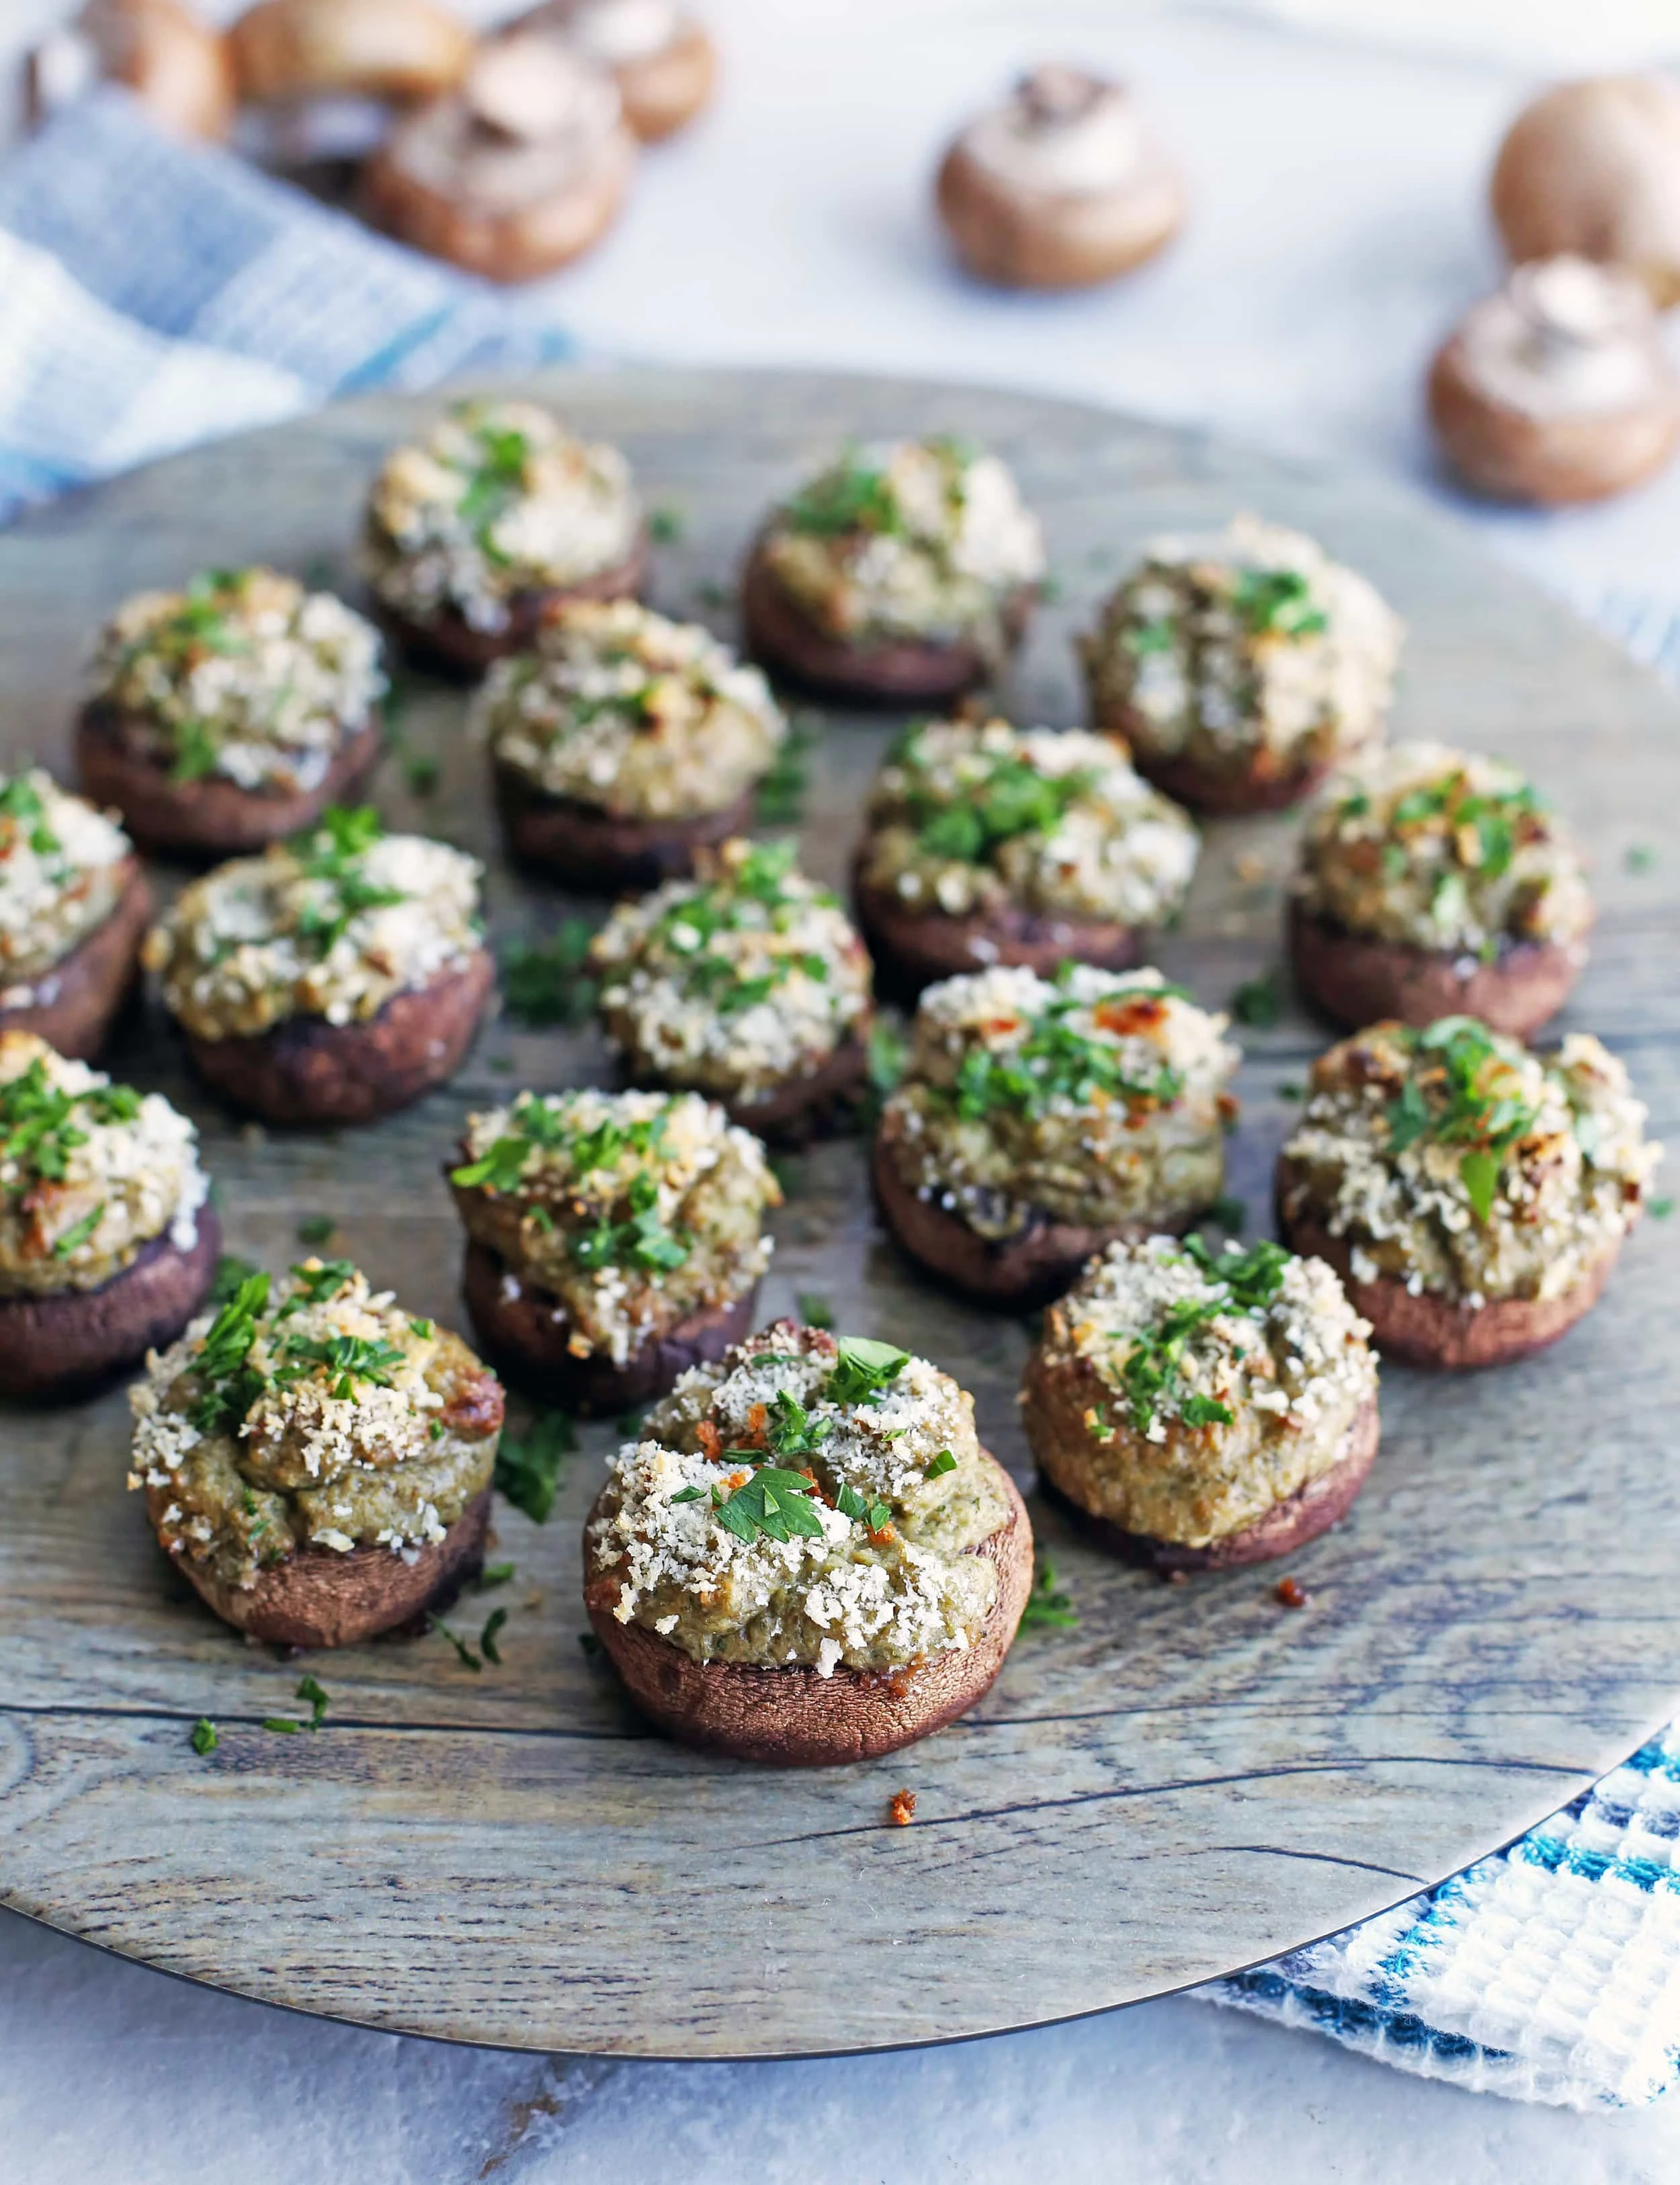 Over a dozen Baked Cheese Stuffed Mushrooms topped with breadcrumbs and chopped parsley on a round platter.